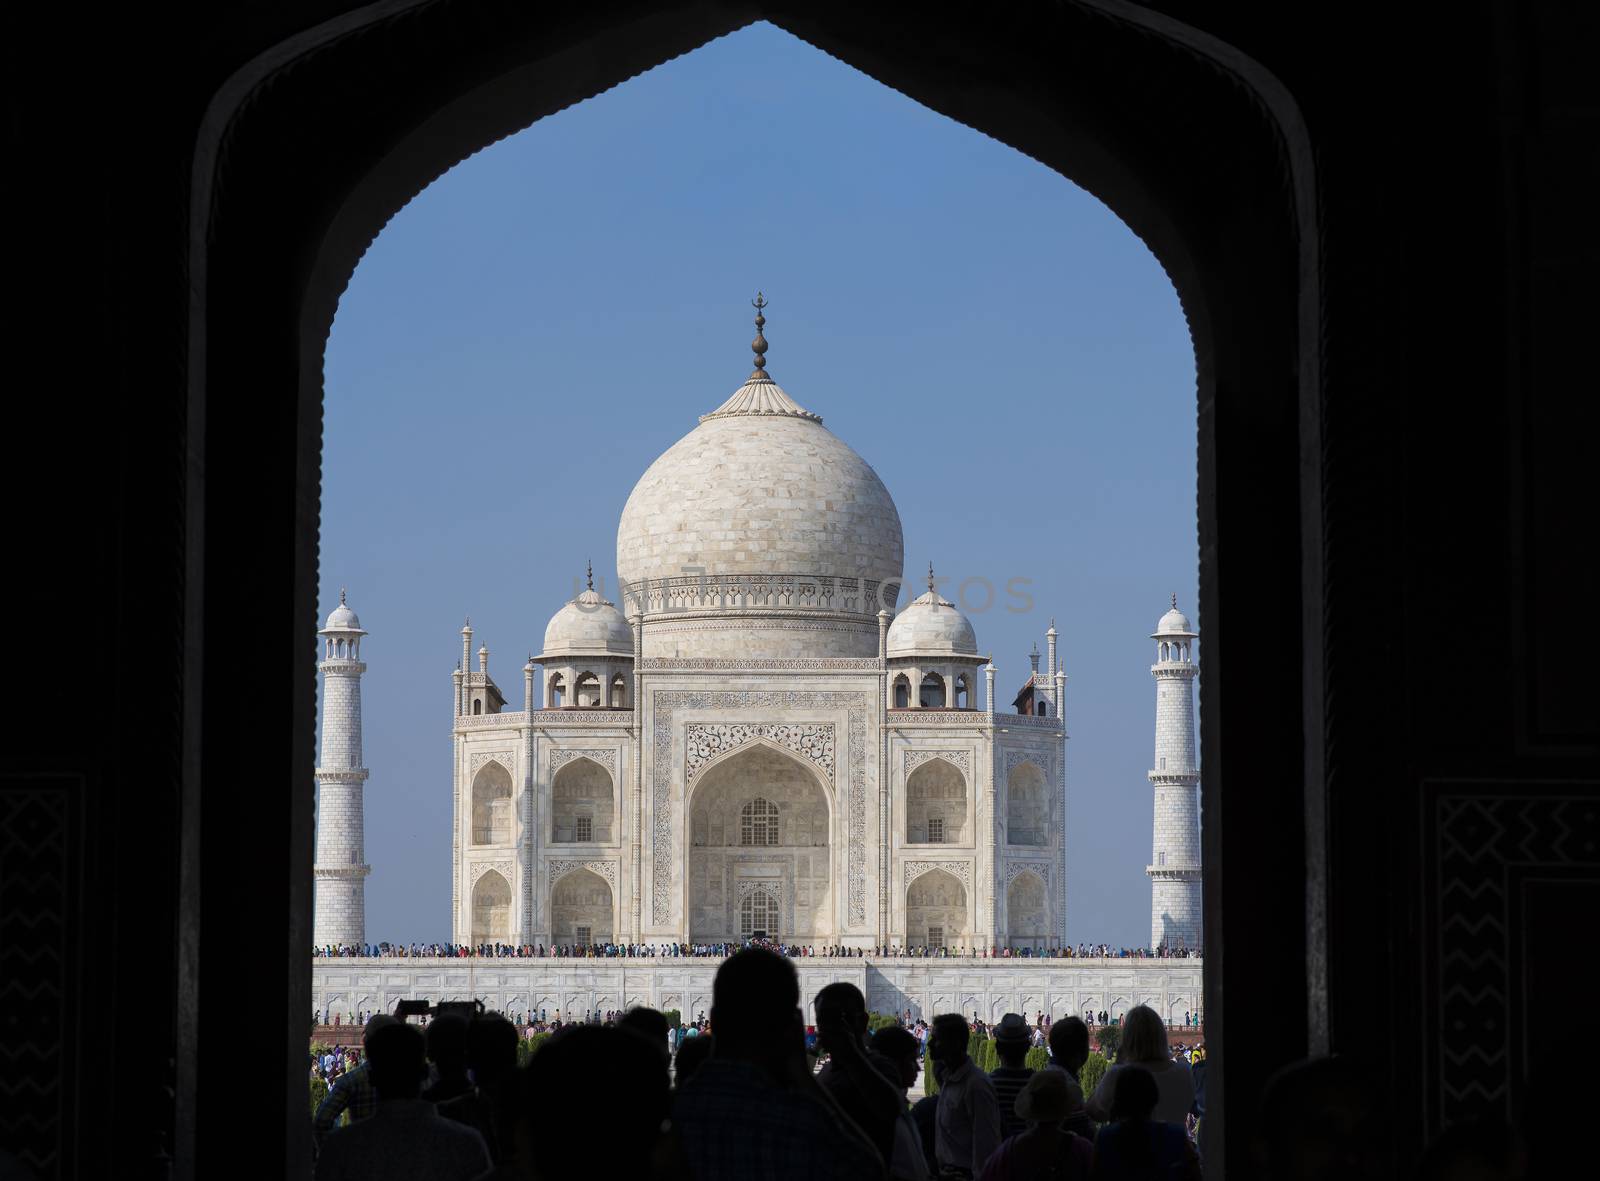 Taj Mahal viewed through entrance gate and silhouette of people going through entry gate to the Taj Mahal complex in Agra, India.